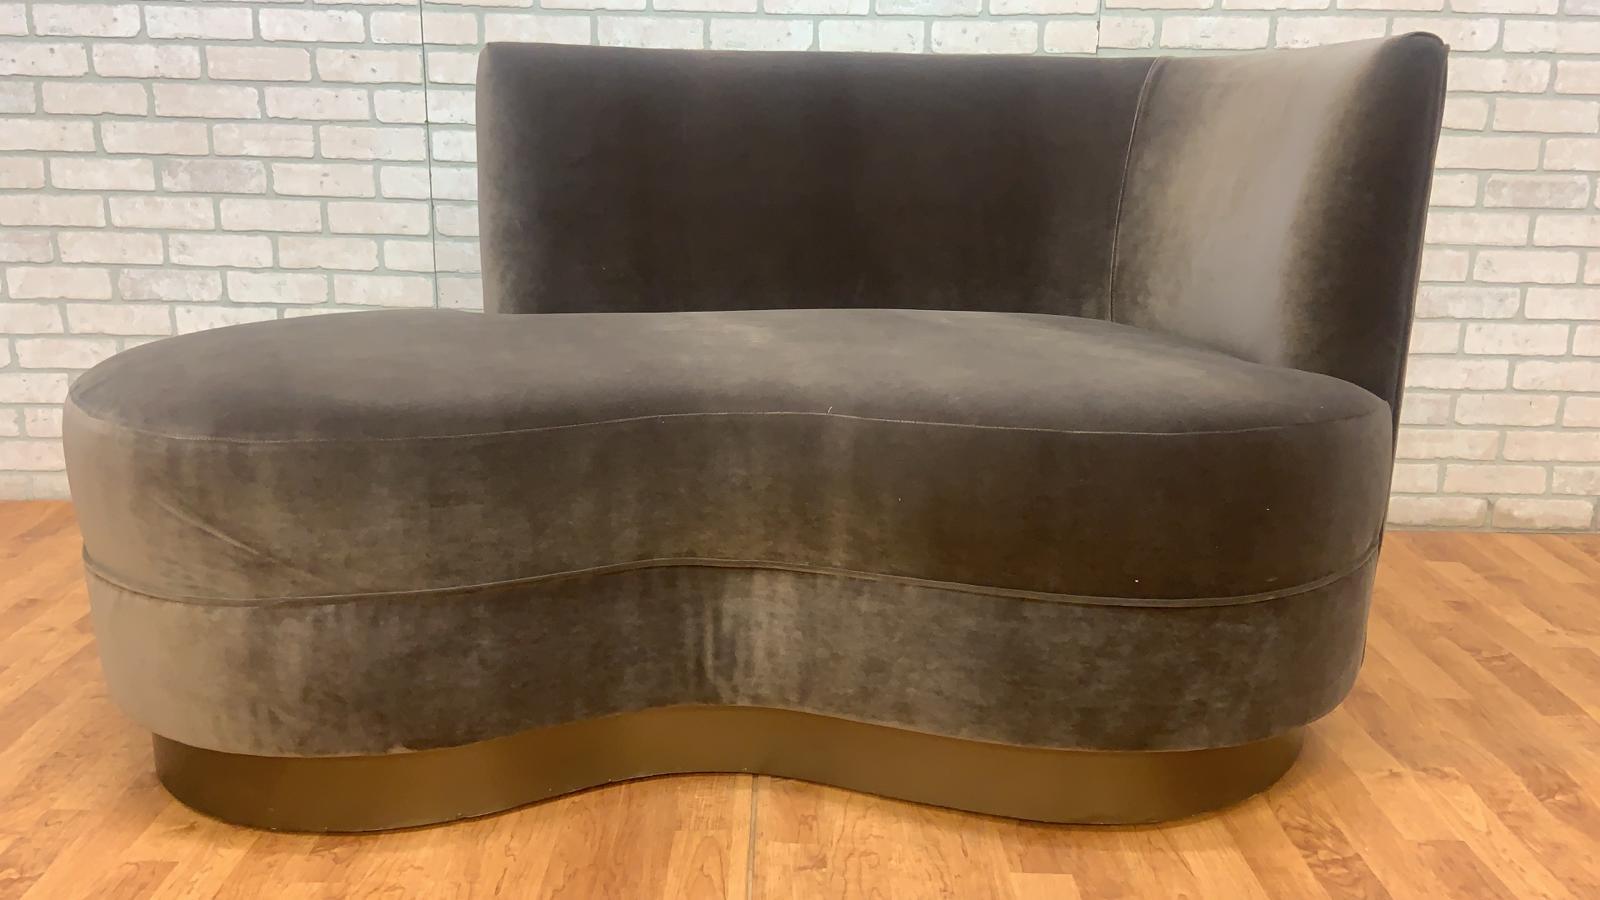 Vintage Mid Century Modern Chaise Newly Reupholstered in Grey Velvet on a Bronze Base

This vintage Mid Century Modern Chaise is a striking piece of furniture that combines the iconic design elements of the mid-century era with modern